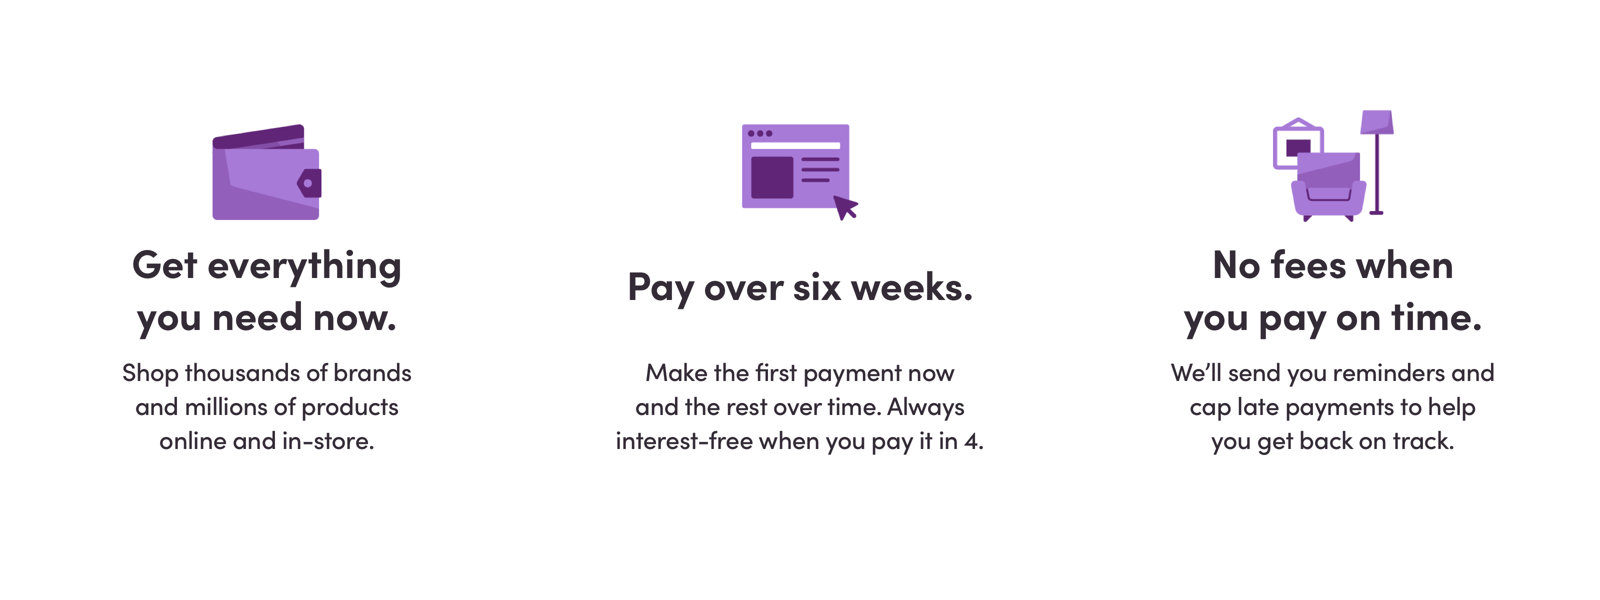 SPRING NOW ACCEPT AFTERPAY PAYMENTS NEW PAYMENT METHOD 